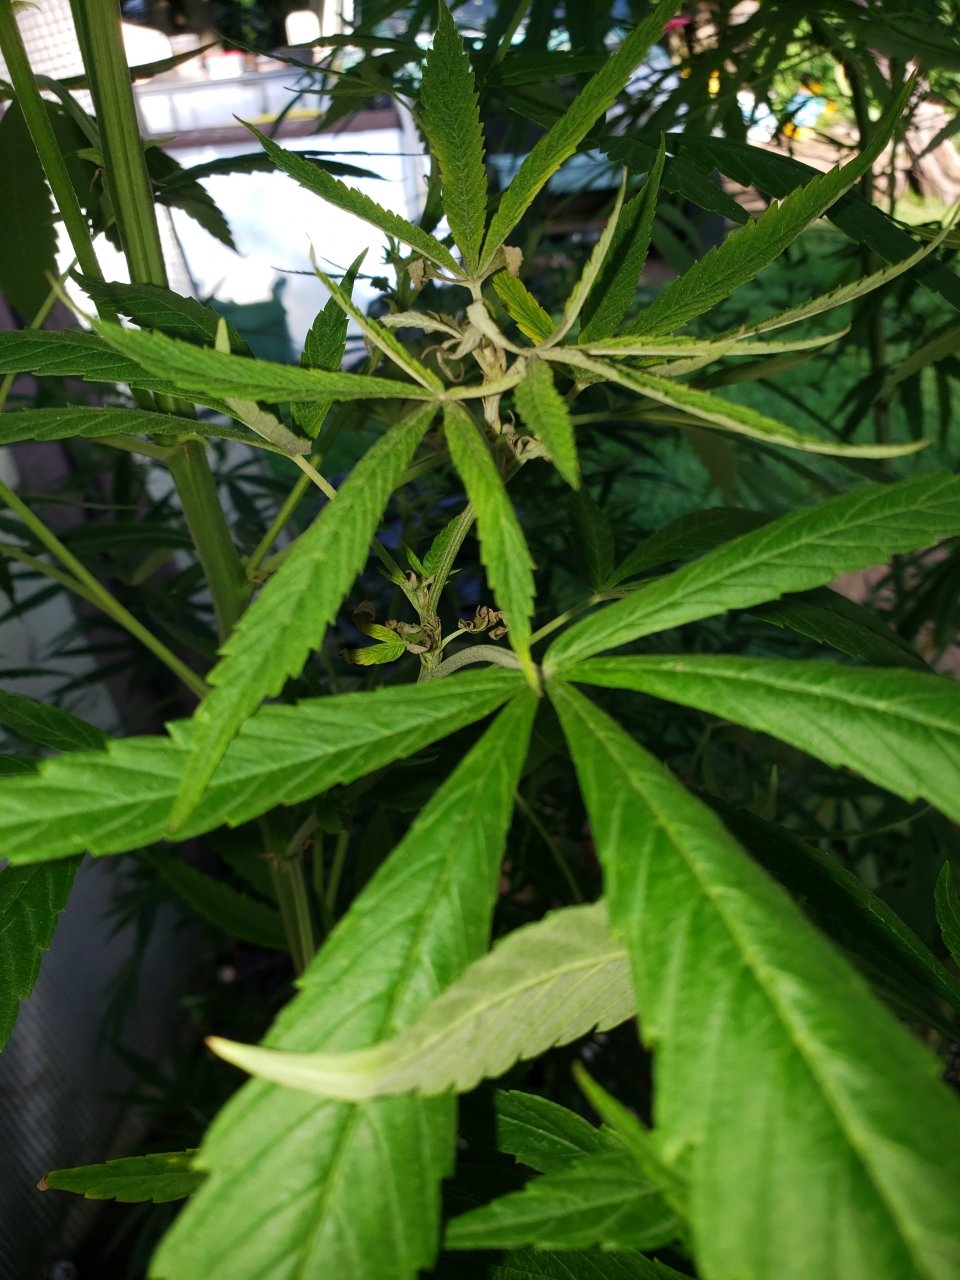 Why is this happening to my outdoor GSC